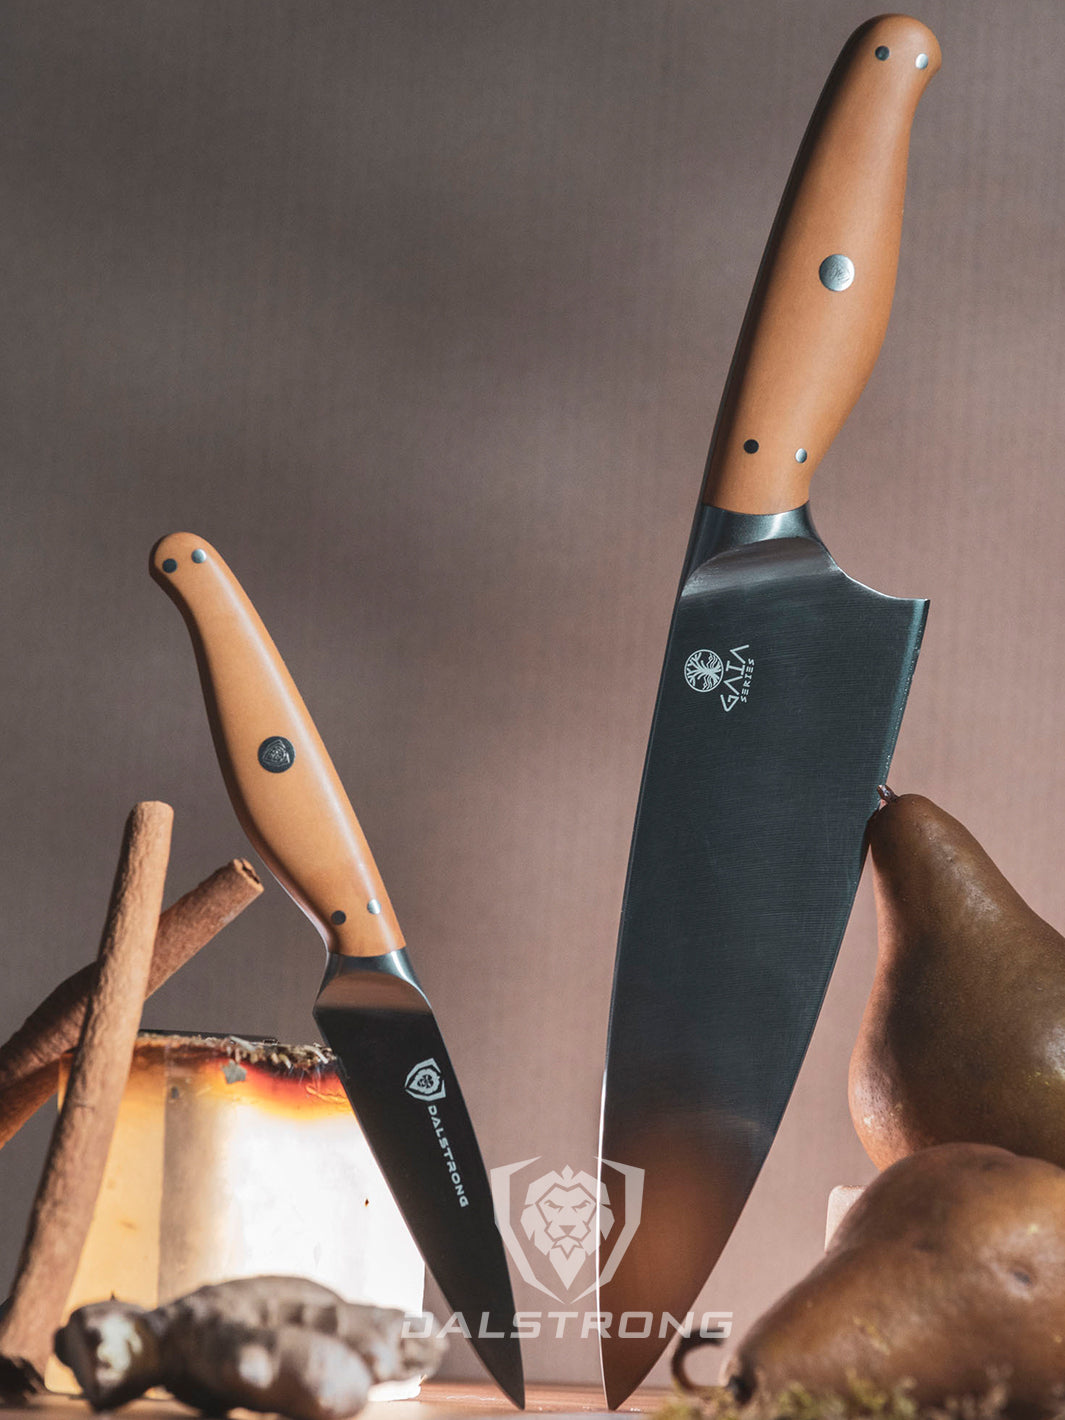 3-Piece Knife Set | Chef - Santoku - Paring | Sustainable and Earth-friendly Material | Gaia Series | Dalstrong ©